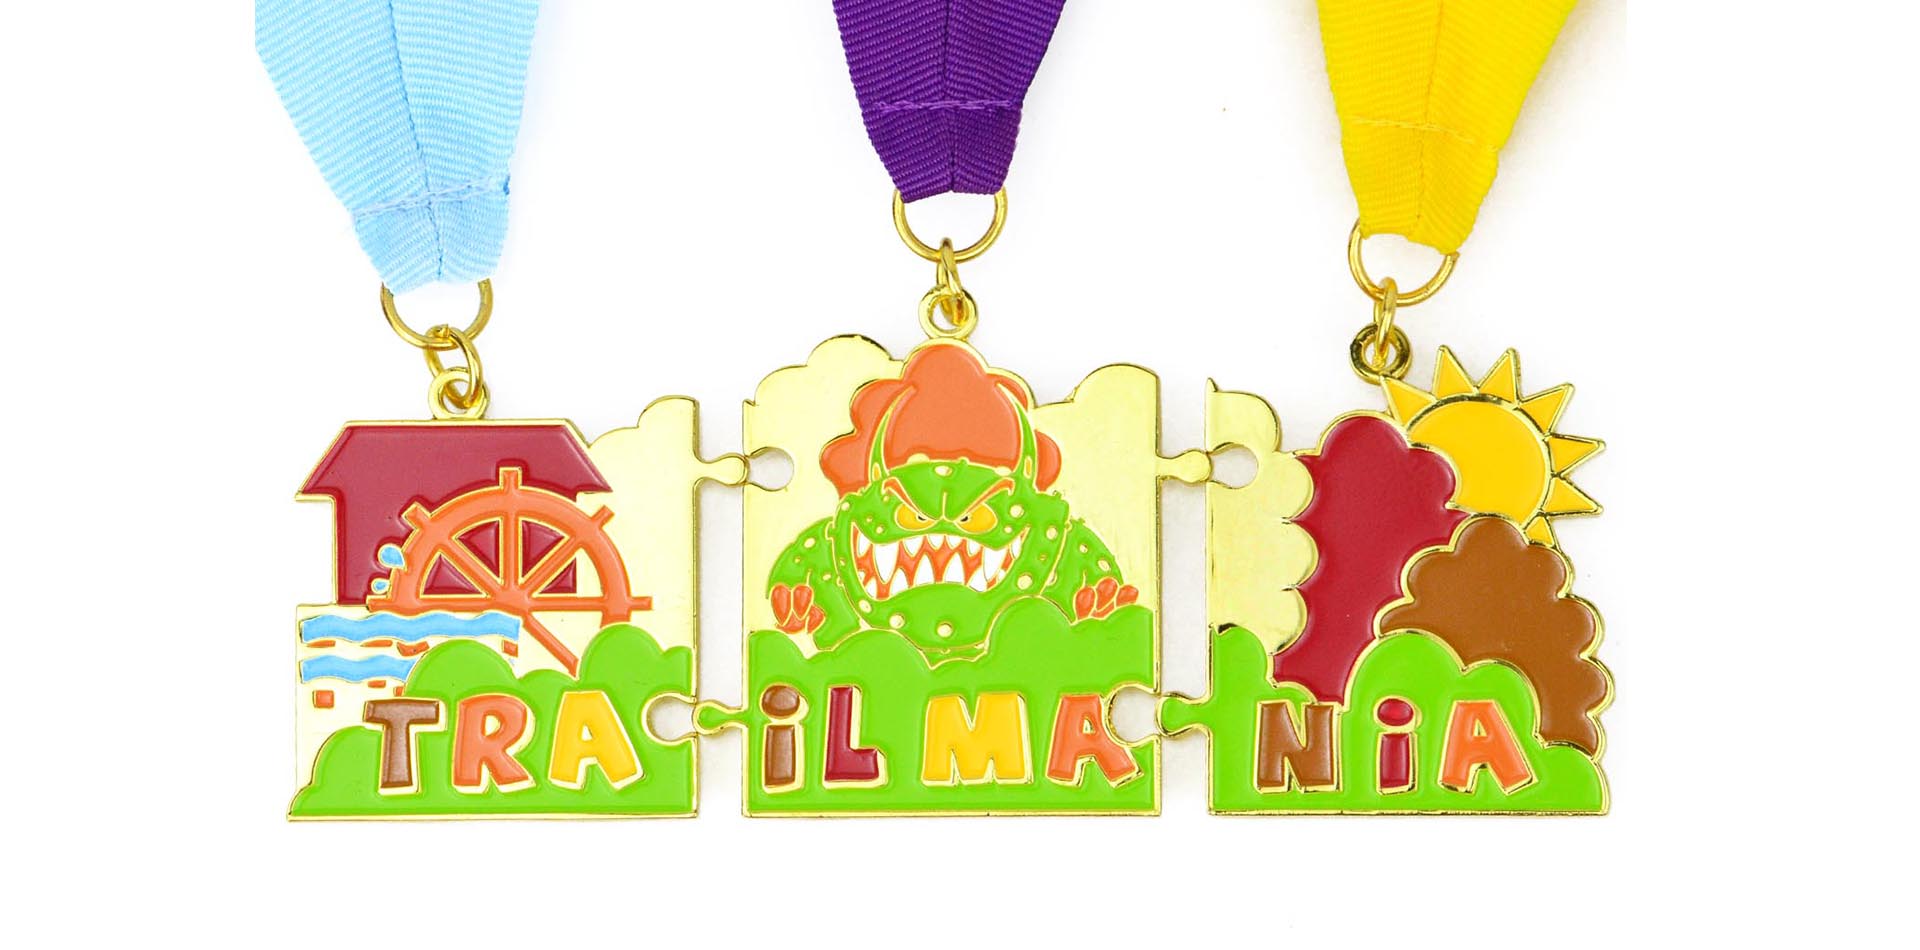 Customized Medals and Awards